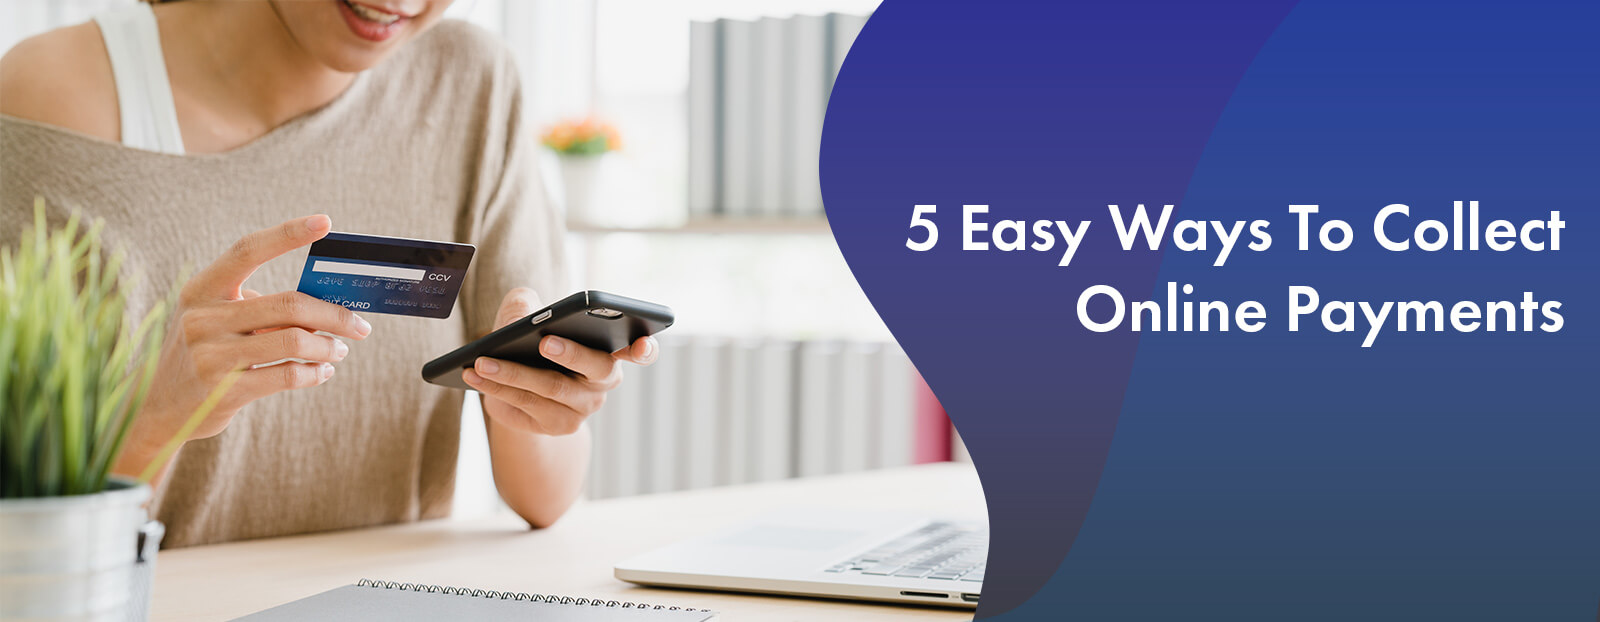 5 Easy Ways To Collect Online Payments